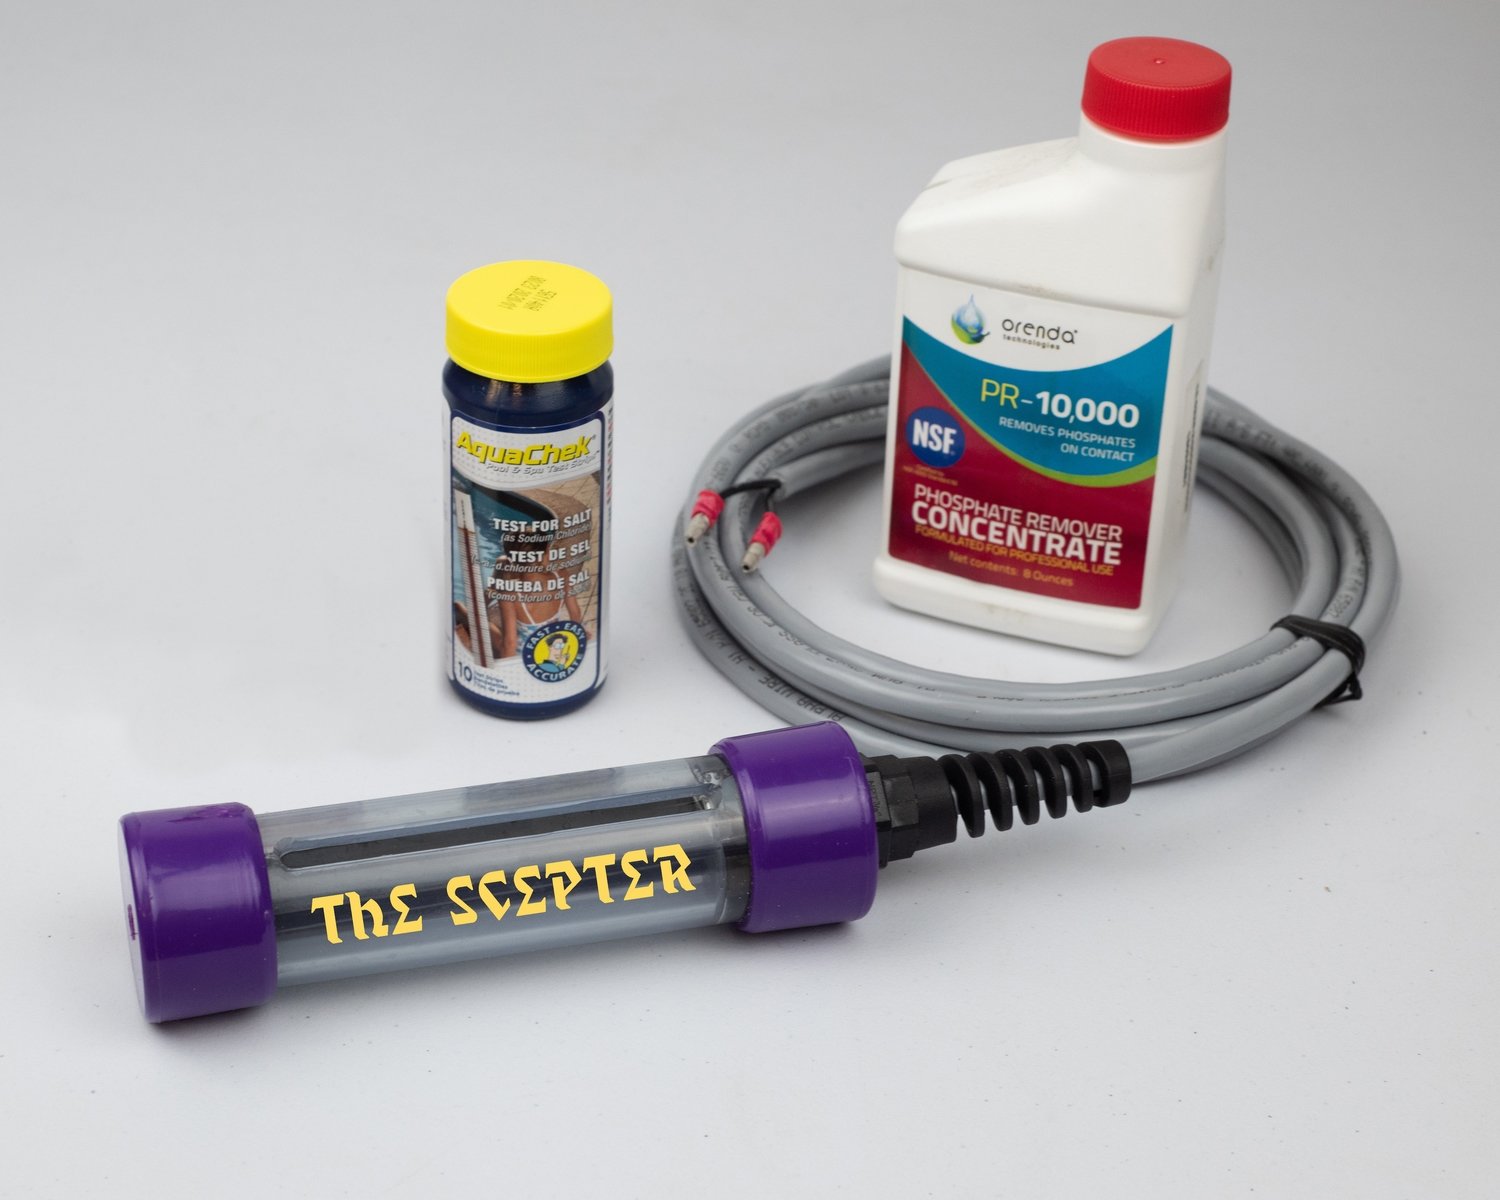 The Scepter ACE® Replacement Salt Cell Bundle